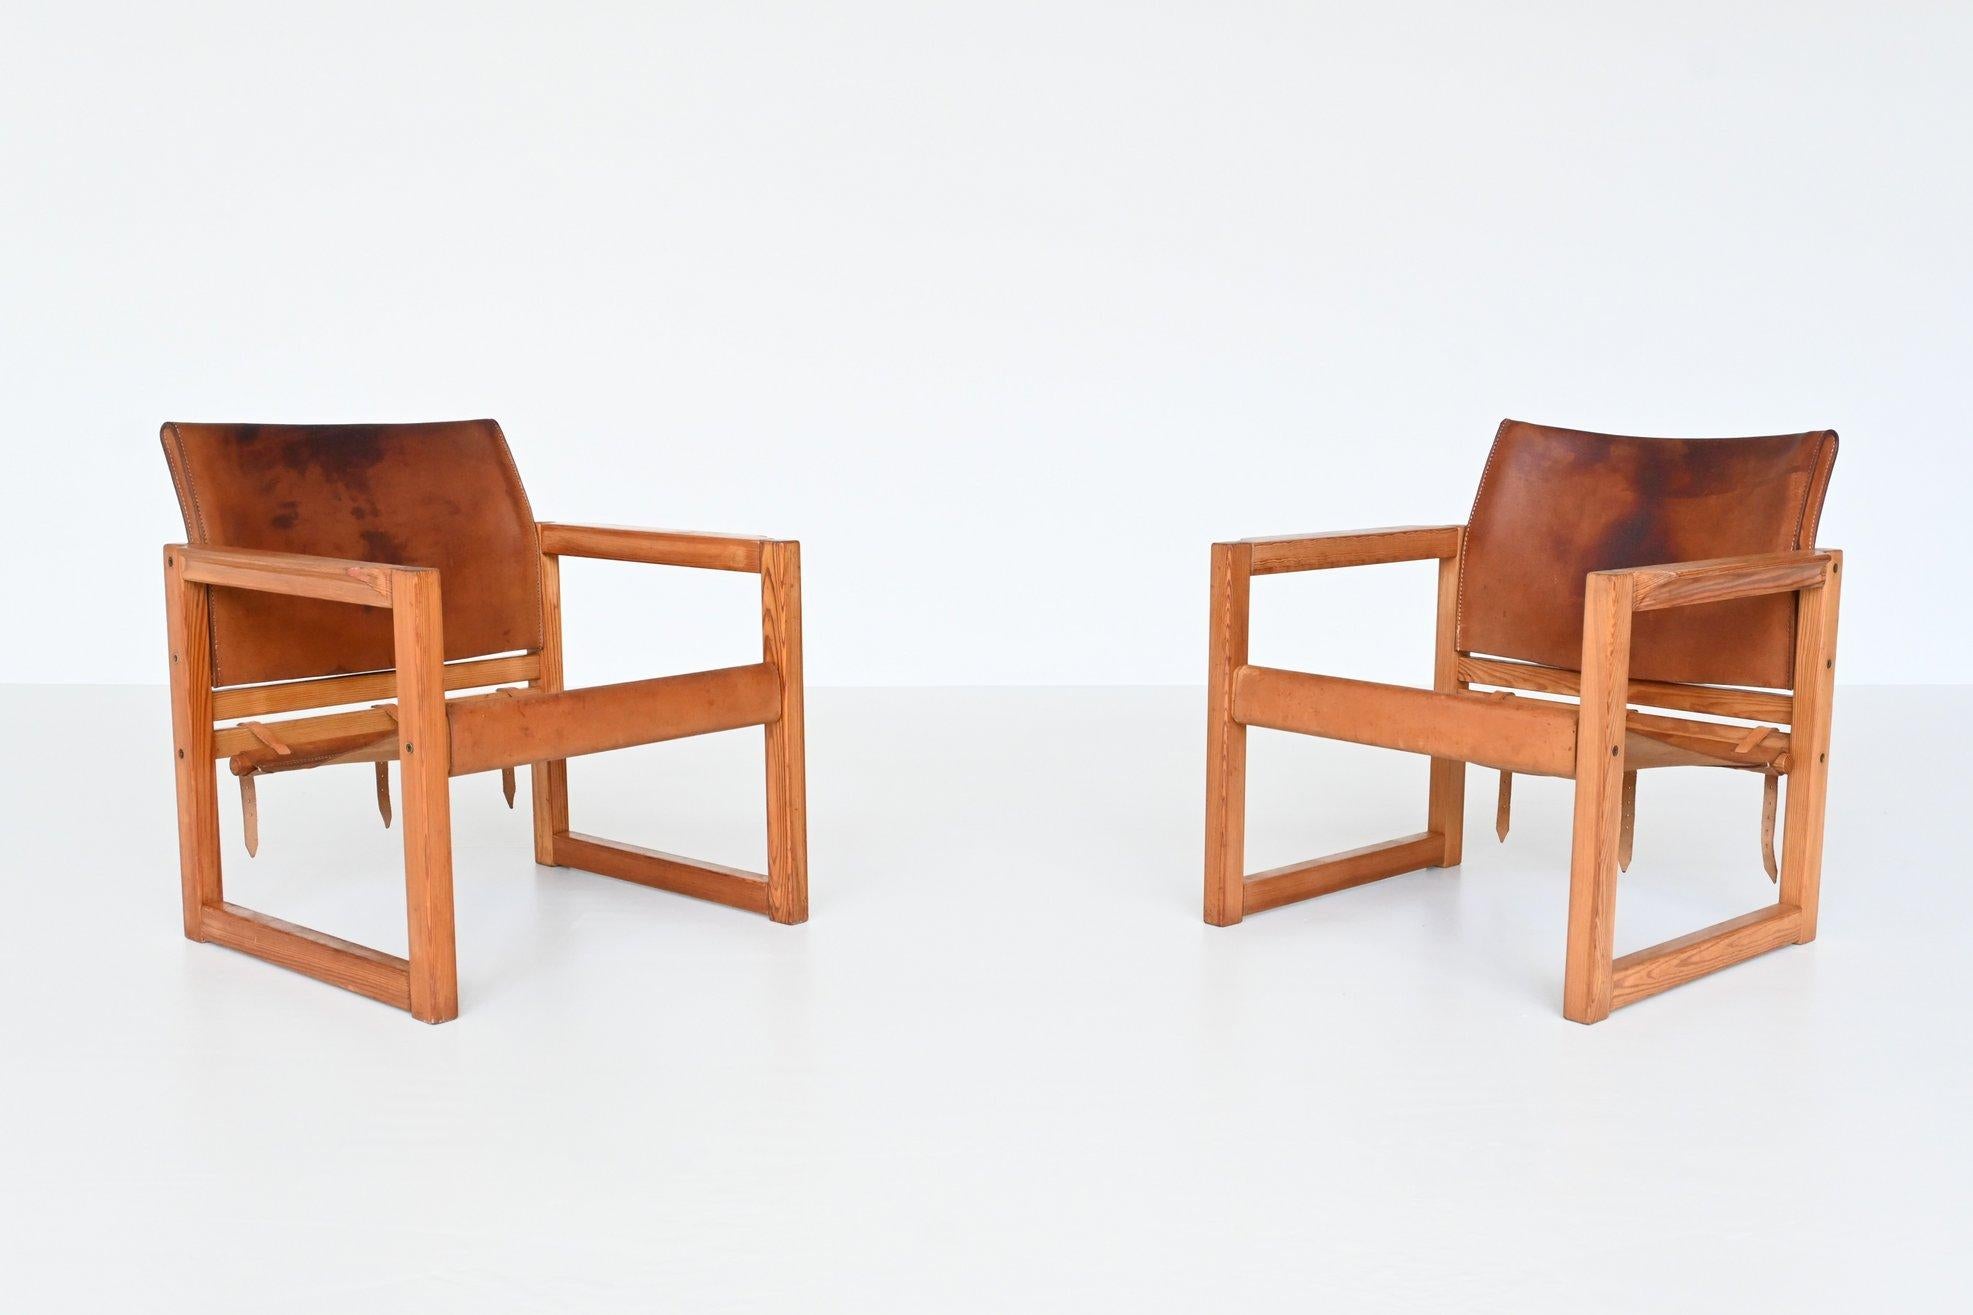 Beautiful elegant pair of Safari lounge chairs model Diana designed by Karin Mobring for IKEA, Sweden 1970. These chairs have a solid pine wooden frame with original cognac saddle leather seating. The straps at the back give the chairs a